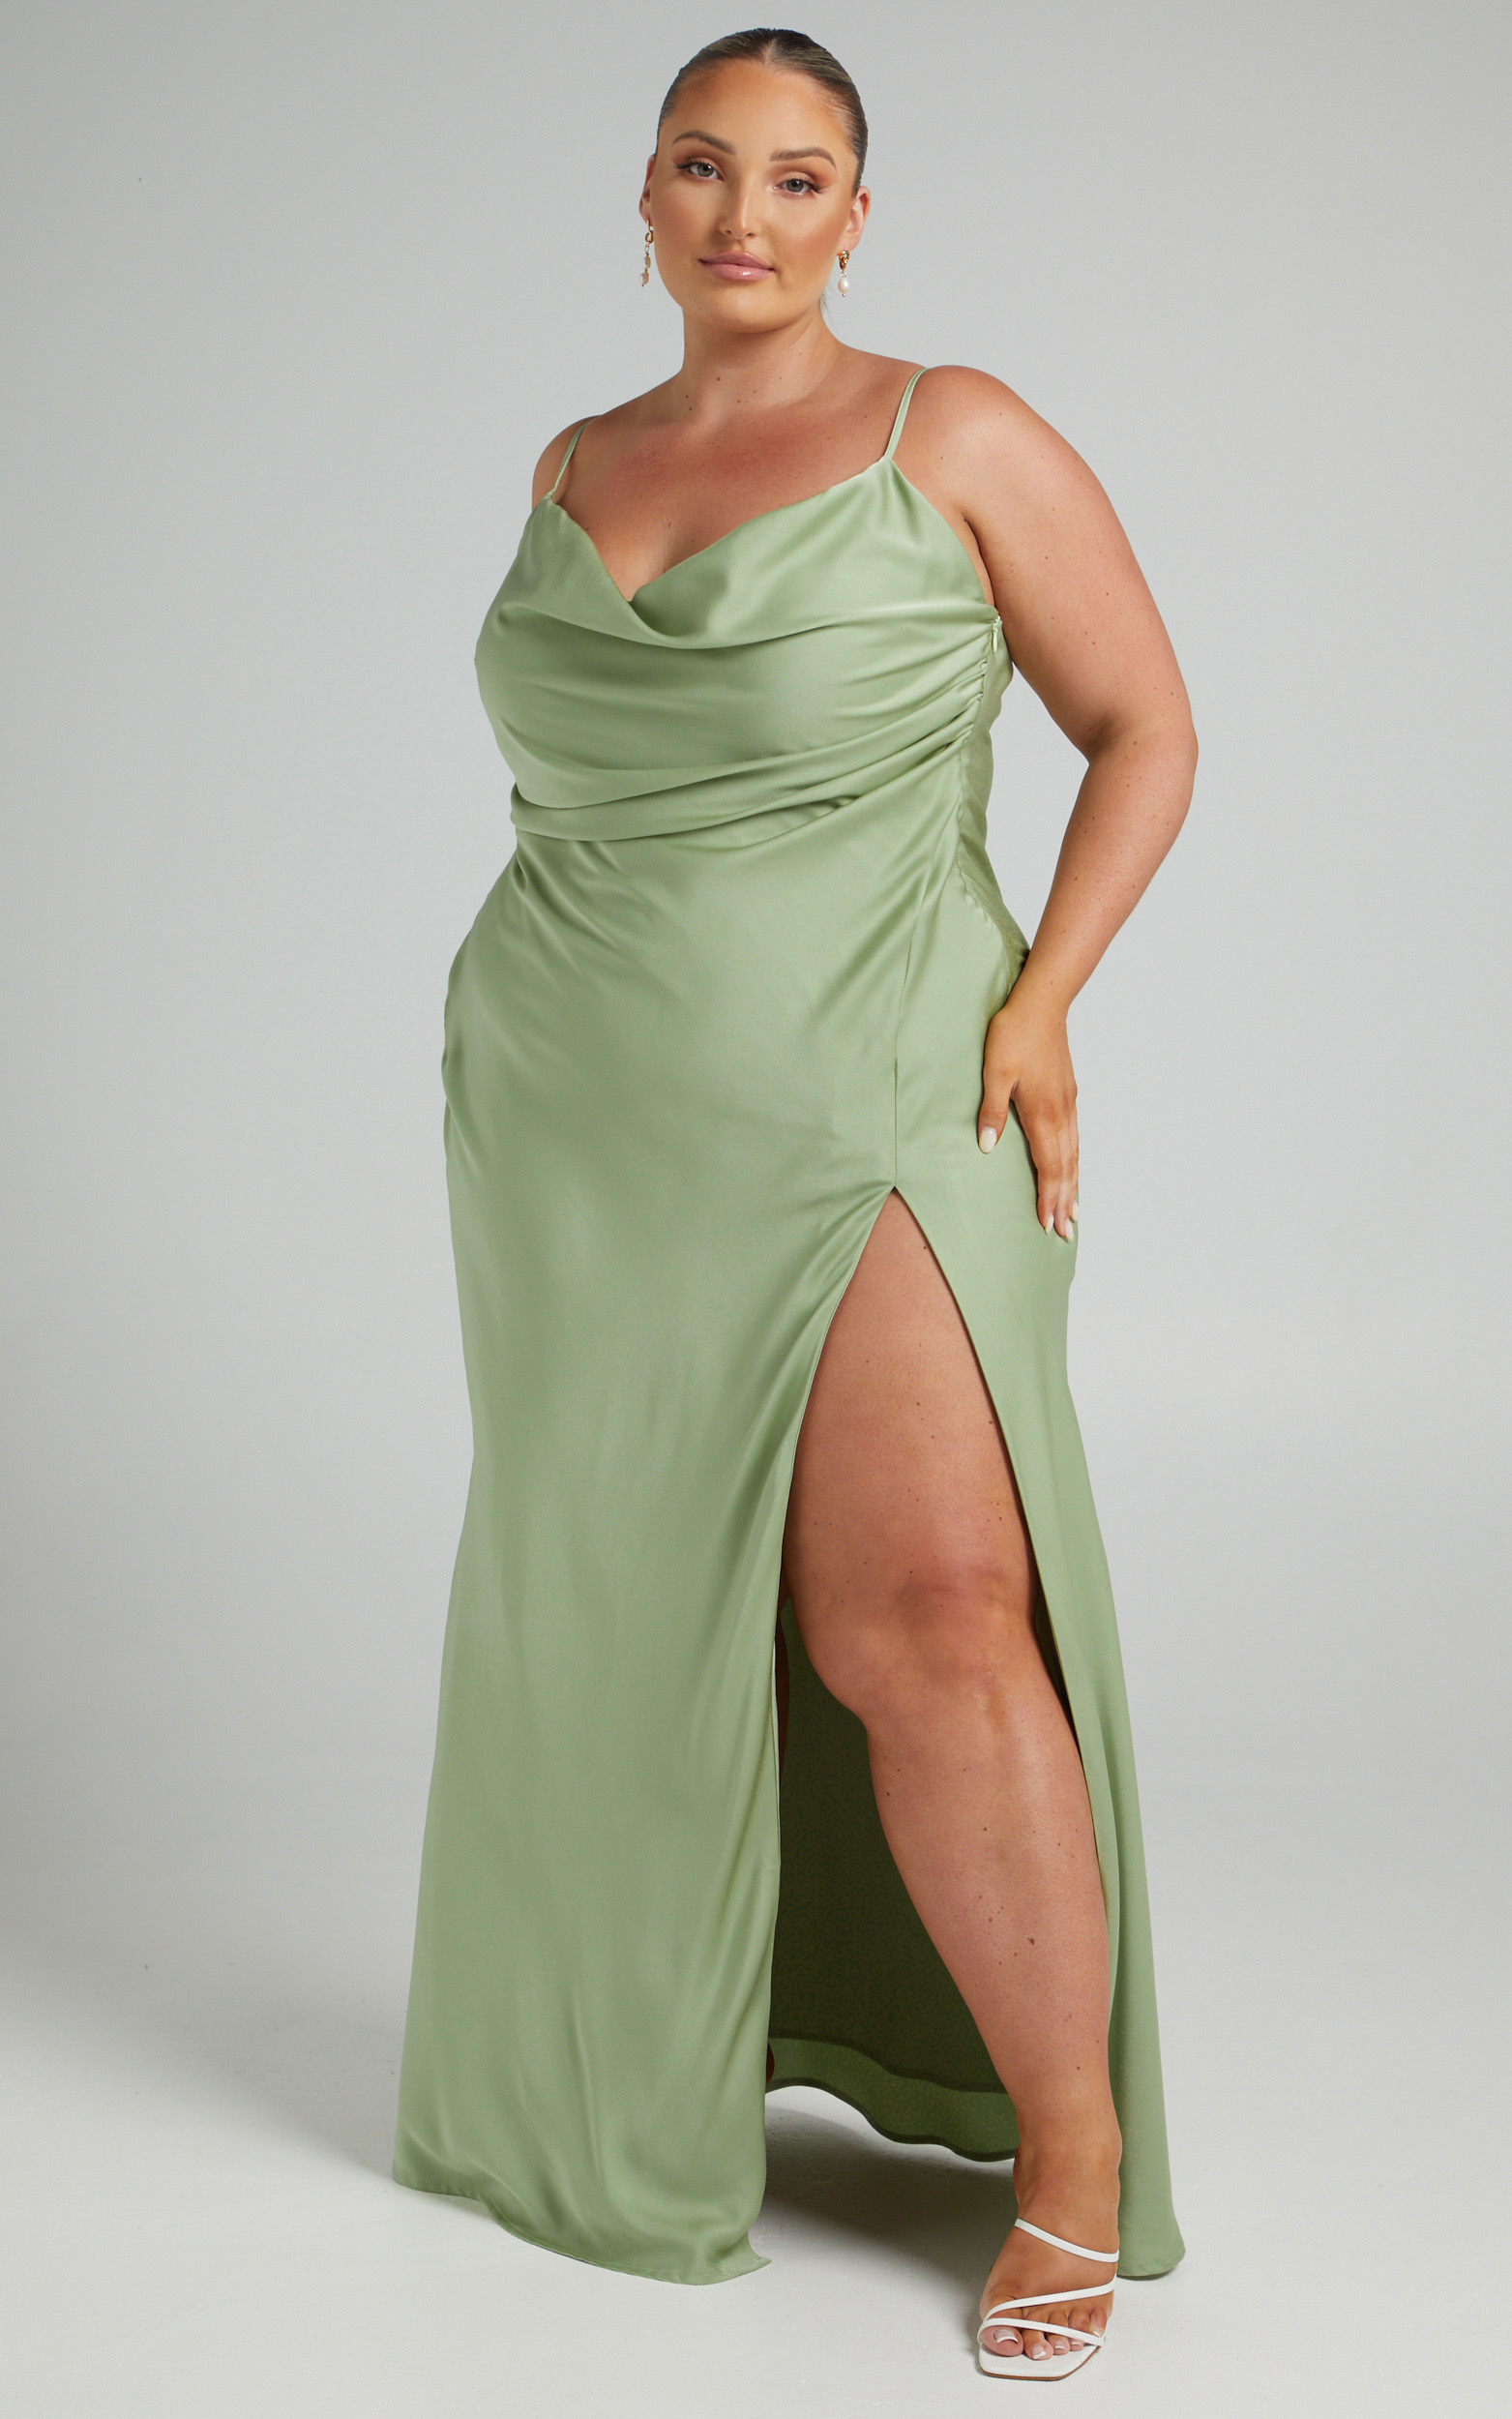 Jewelle Cowl Neck Maxi Dress with High Split in Green - 06, GRN1, hi-res image number null